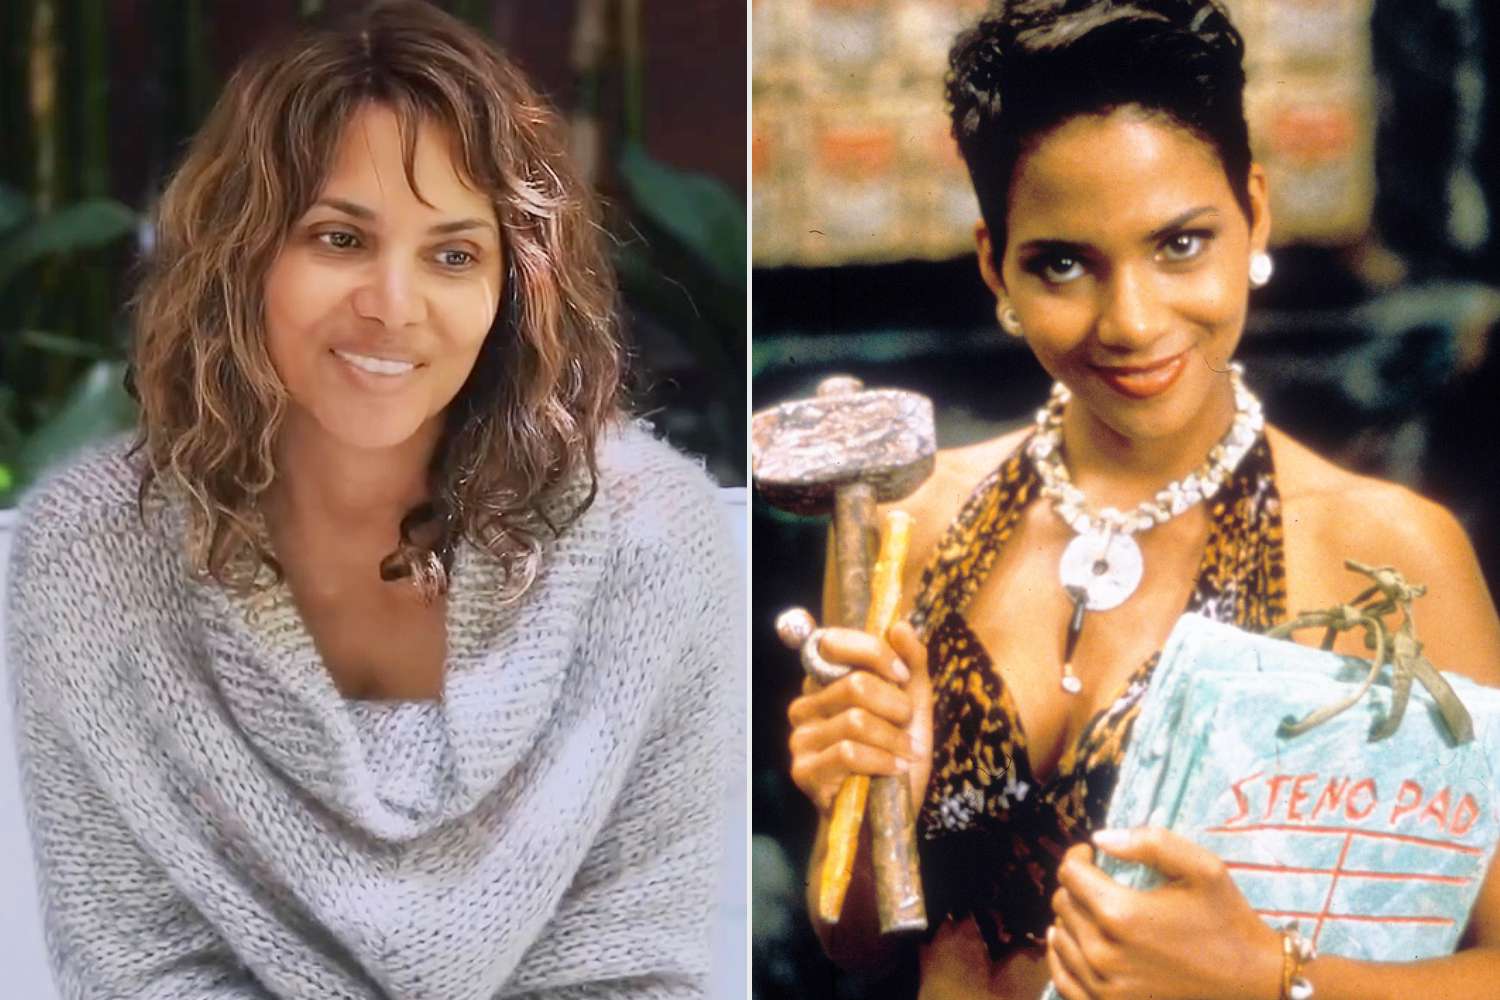 Halle Berry Reflects on “The Flintstones”' 30th Anniversary, How Role Was a 'Big Step' for Black Women